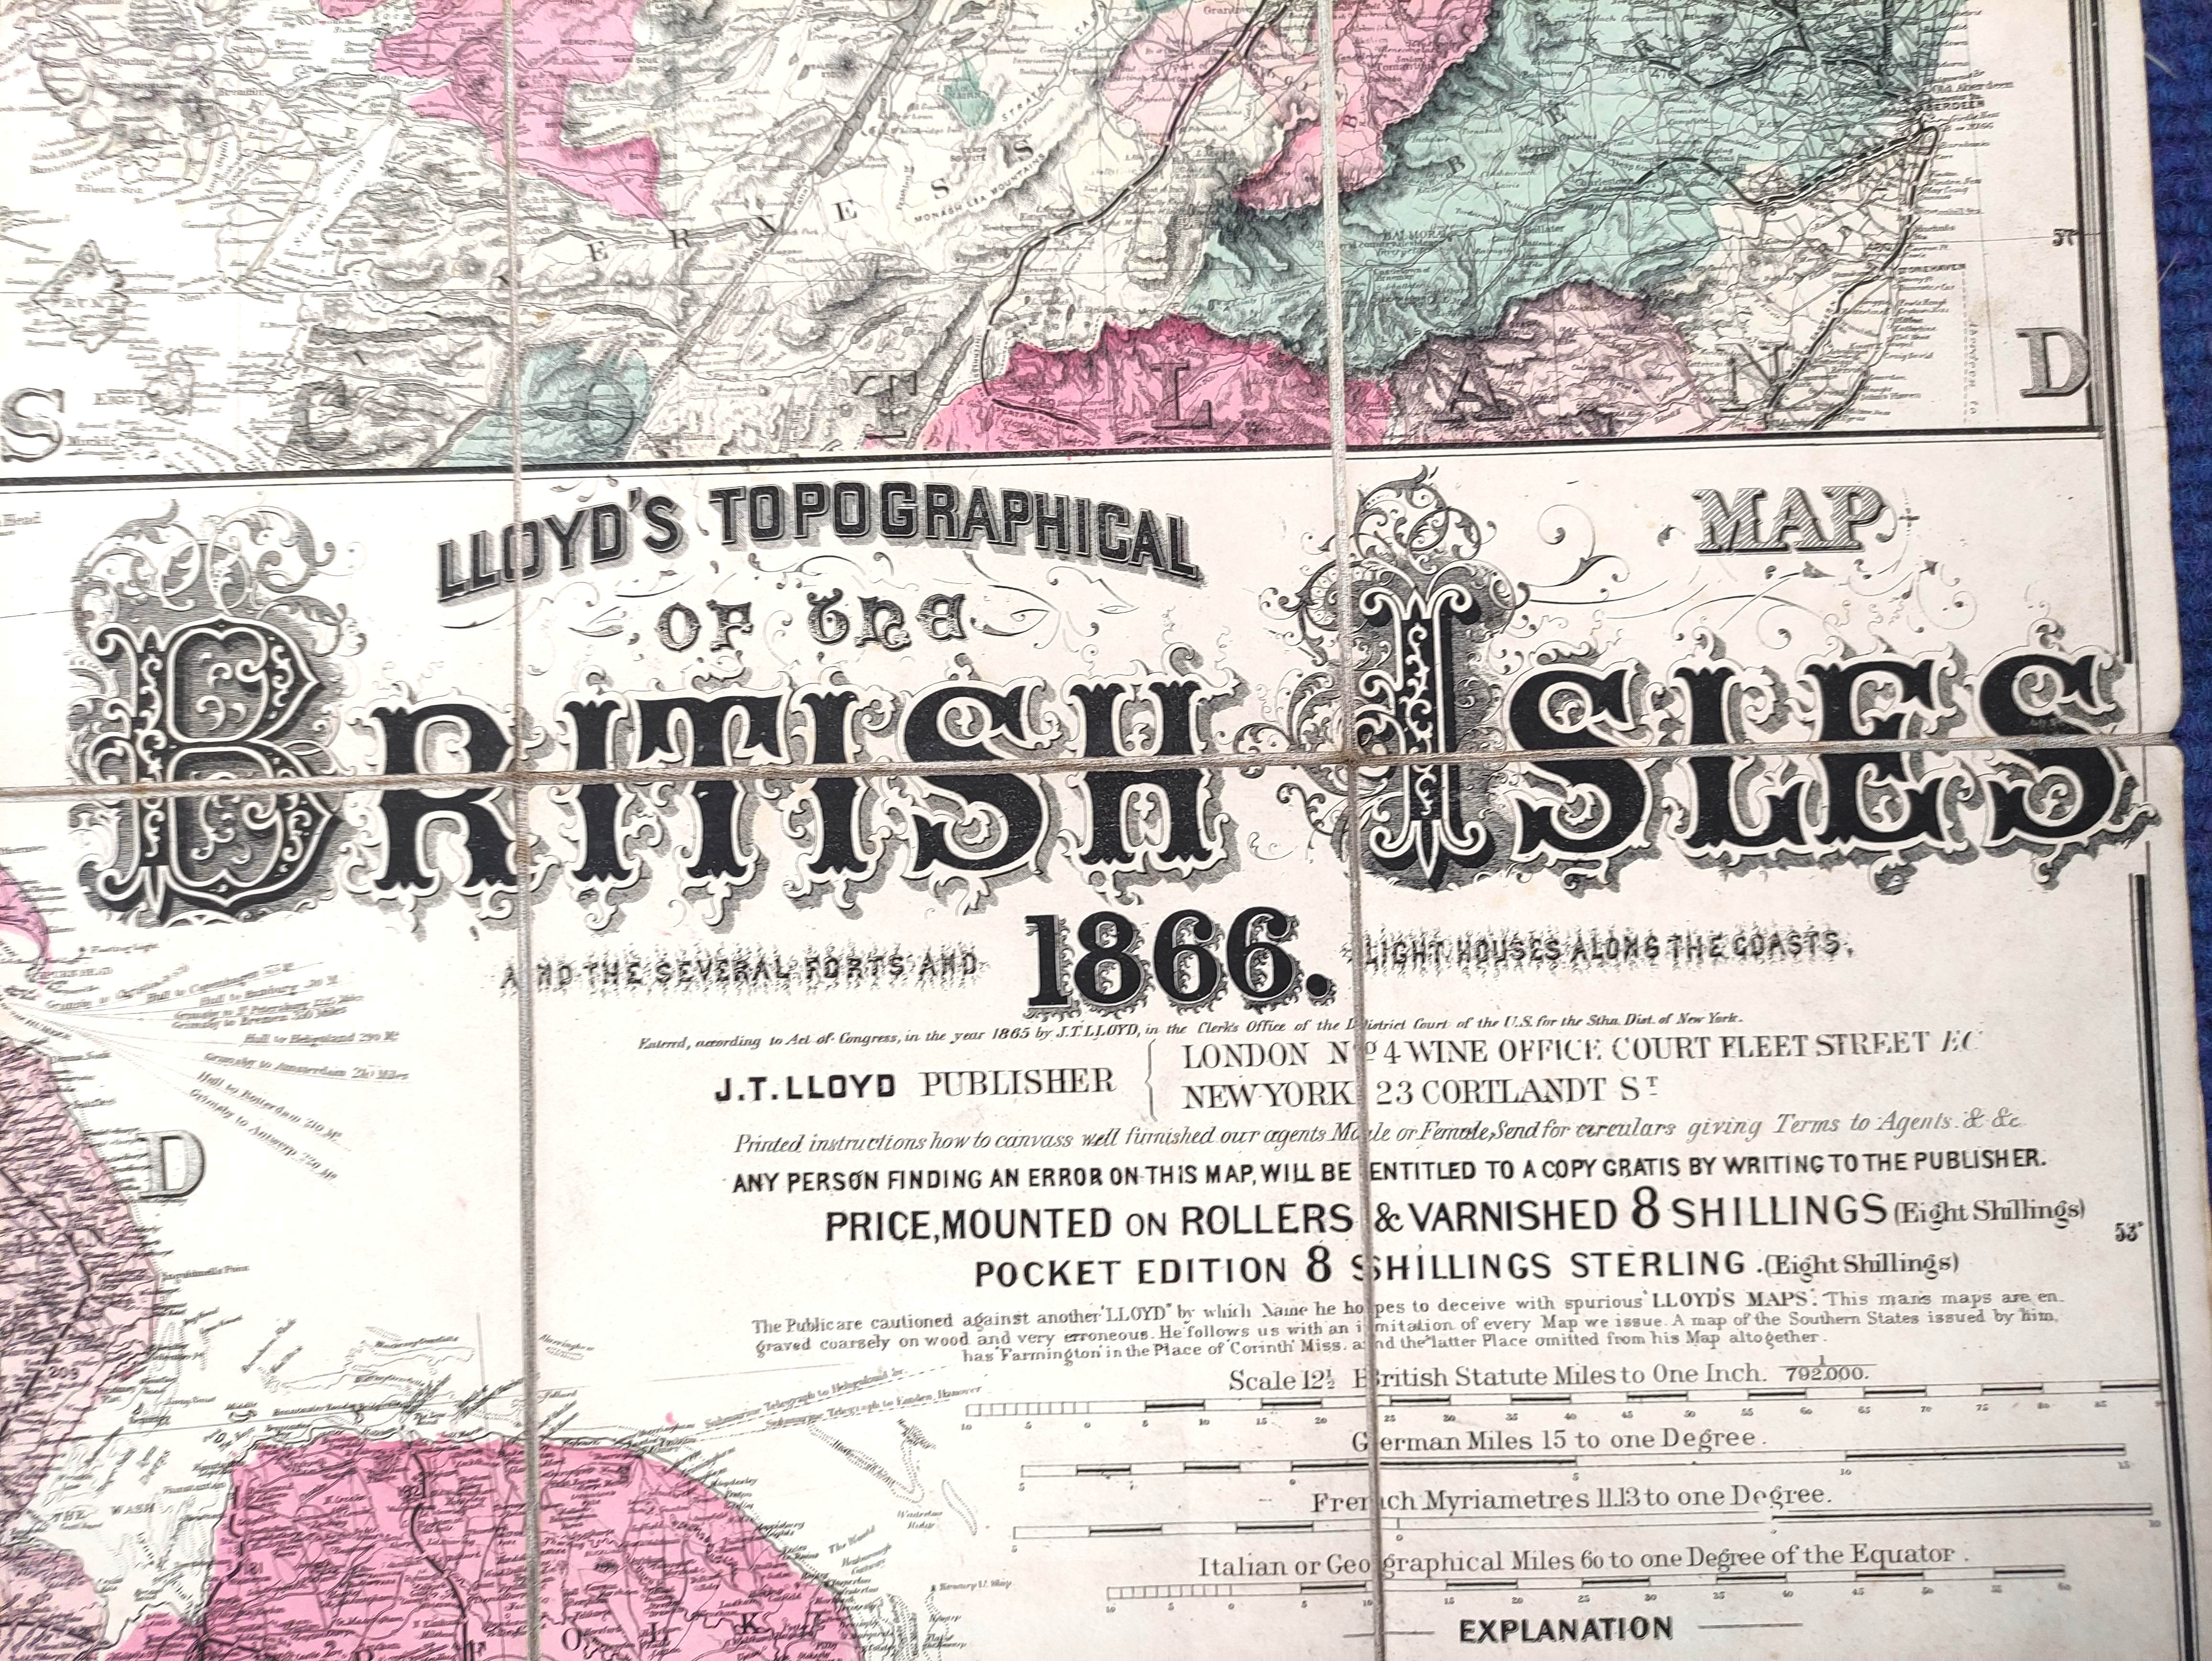 LLOYD J. T.  Lloyd's Topographical Map of the British Isles & the Several Forts & Light Houses along - Image 3 of 5